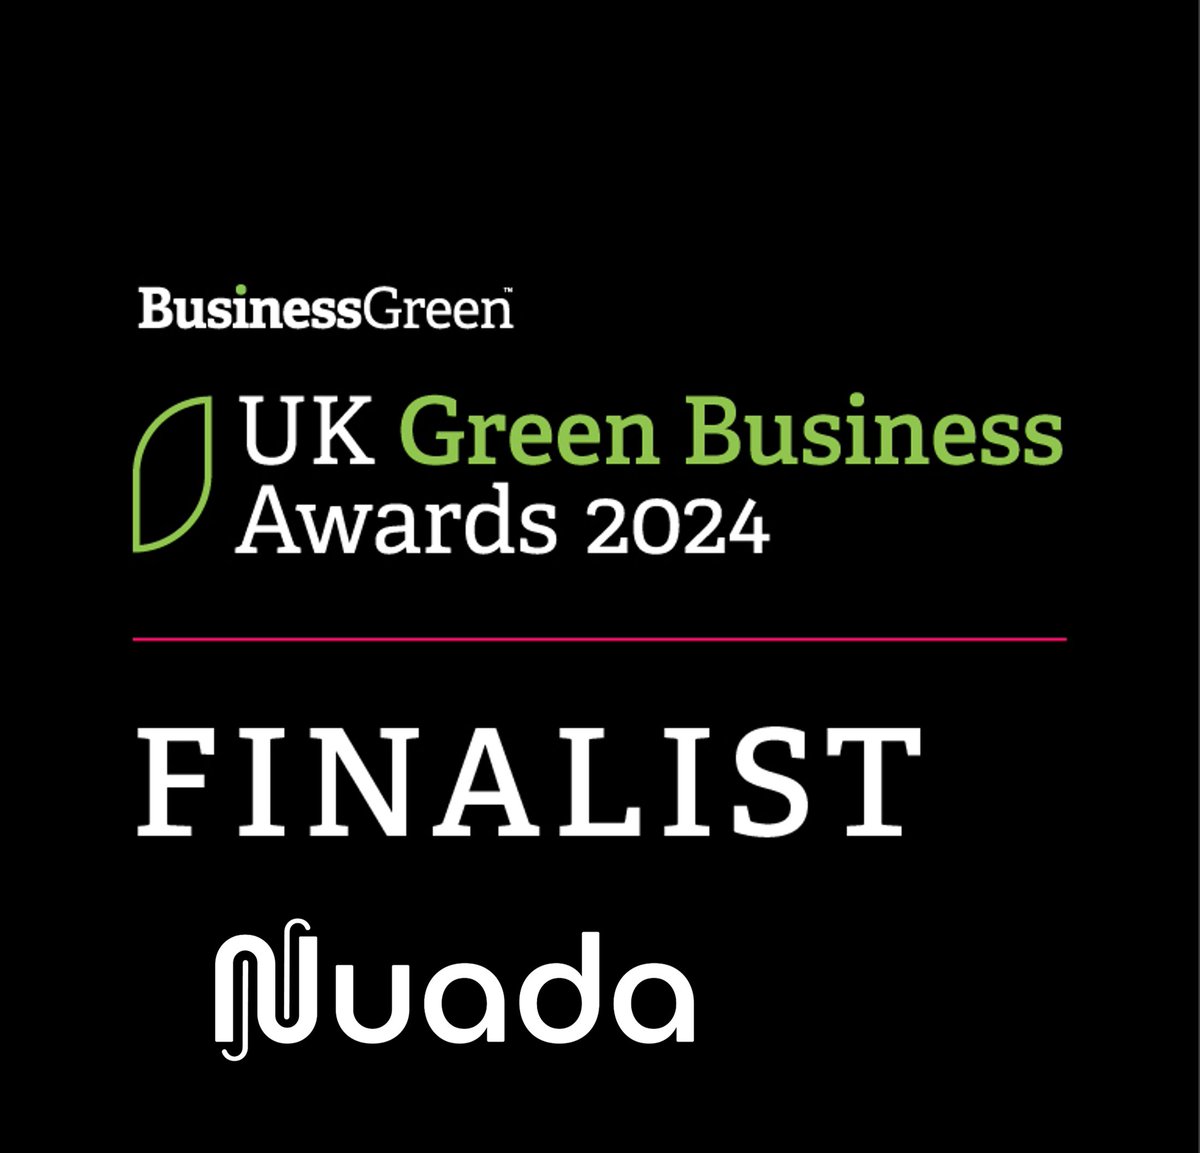 🏆Nuada has been nominated for the “Innovation of the Year” award from the UK Green Business Awards 2024! 🚀Nuada's leading position in carbon capture innovation is becoming widely accepted as we continue to deploy our ultra-energy efficient solution! #ccus #NetZero #innovation